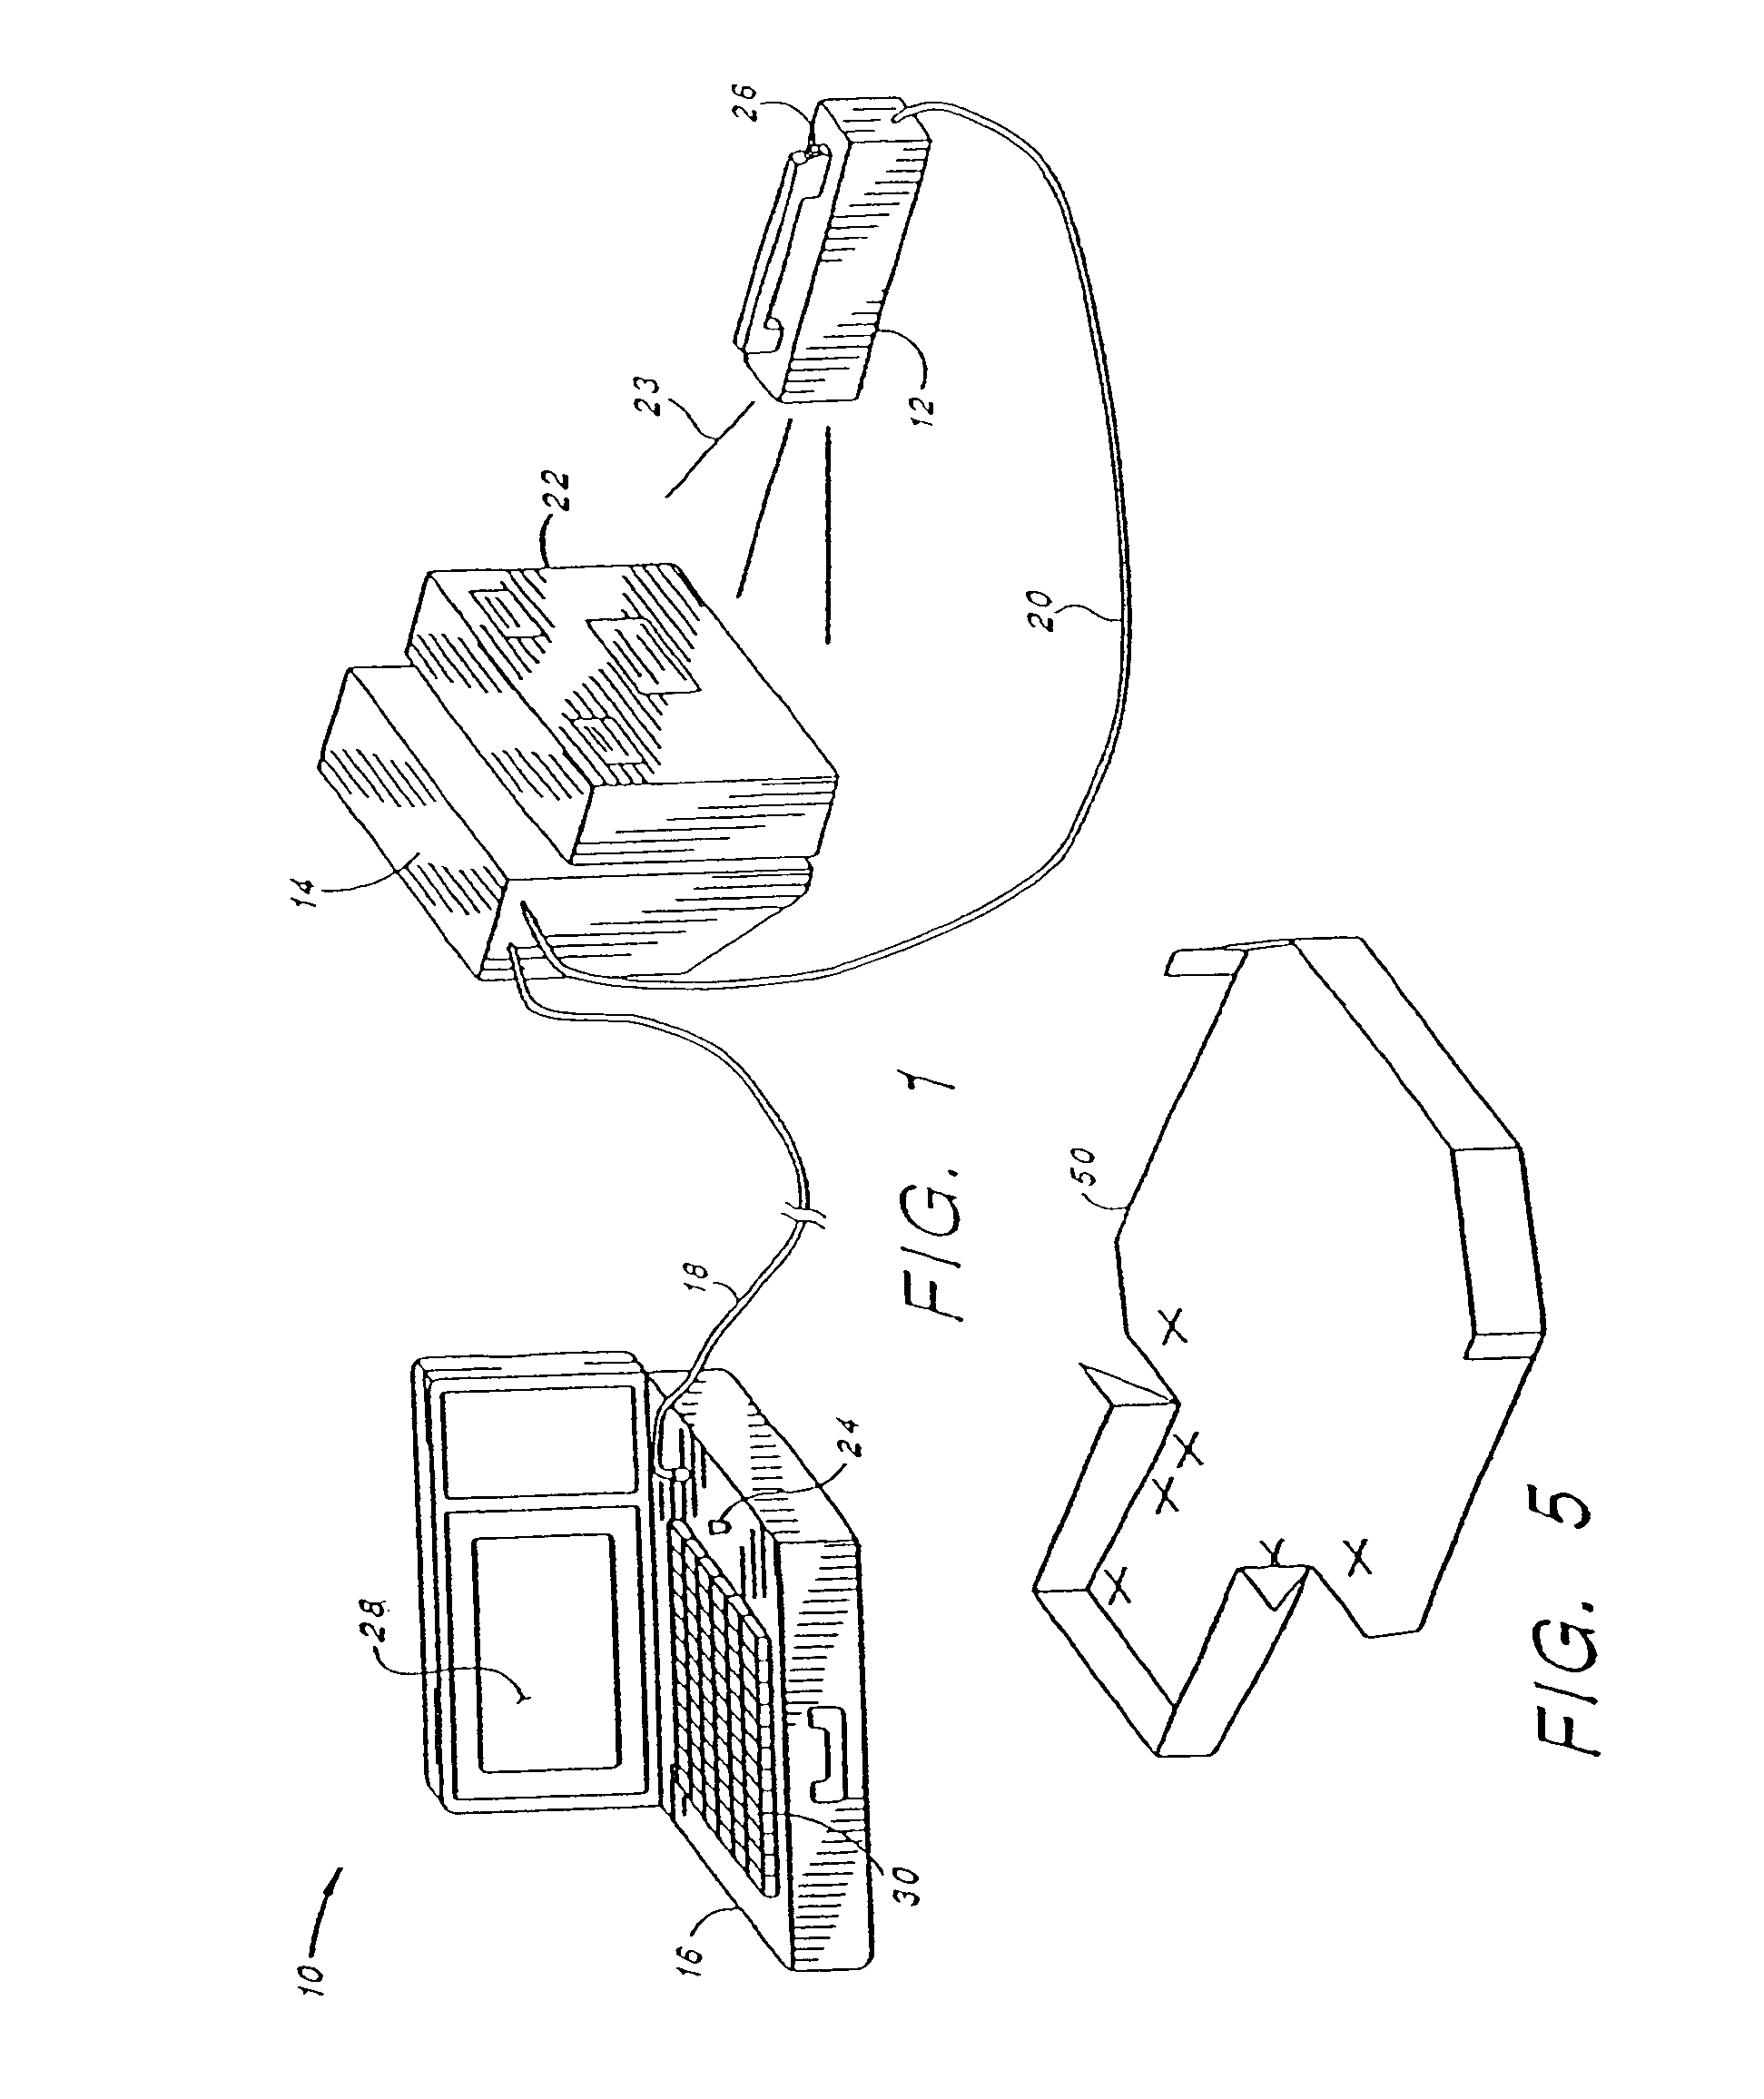 Portable, digital X-ray apparatus for producing, storing, and displaying electronic radioscopic images